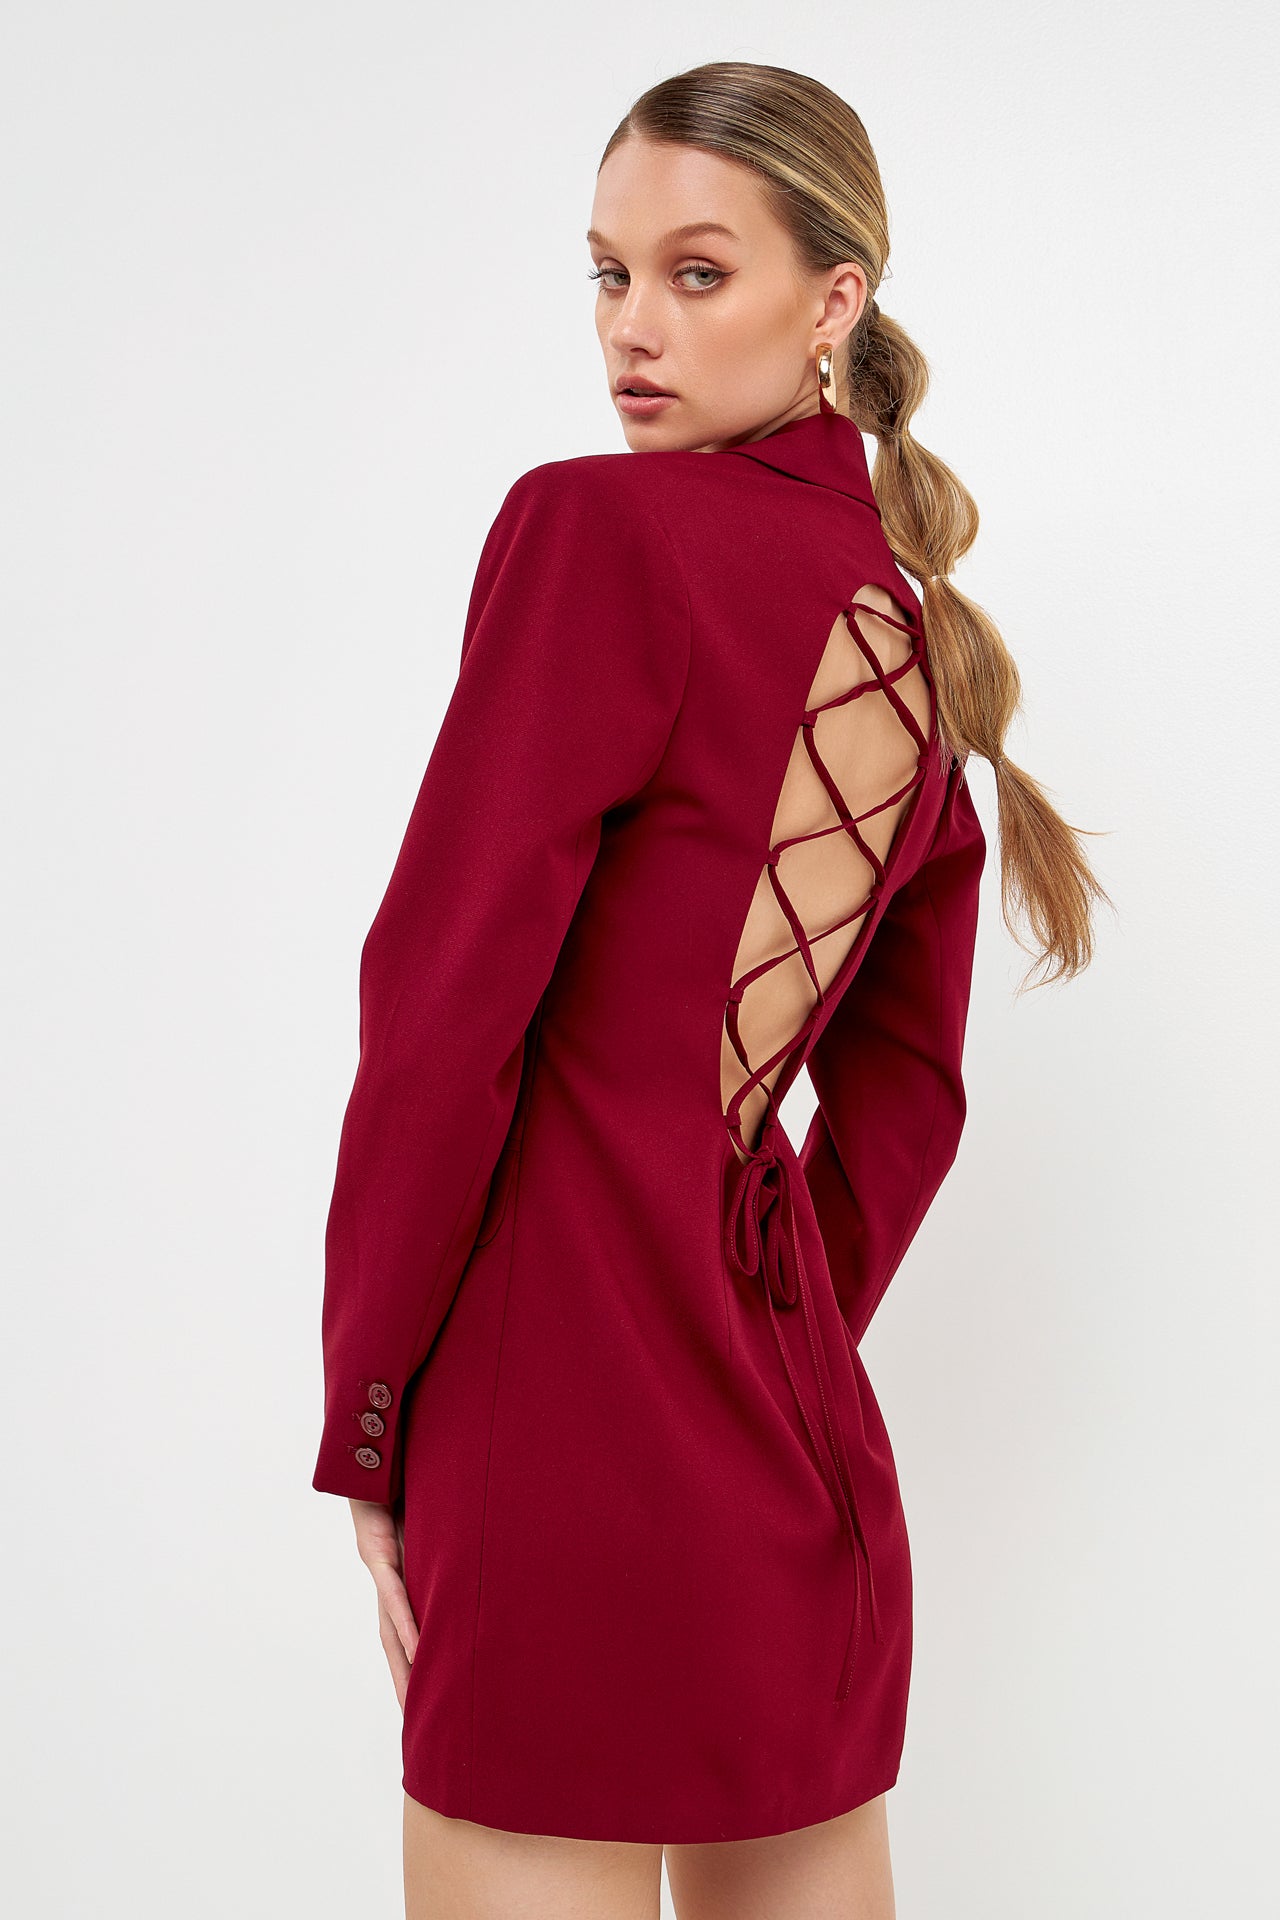 ENDLESS ROSE - Collared Dress with Open Back Detail - DRESSES available at Objectrare